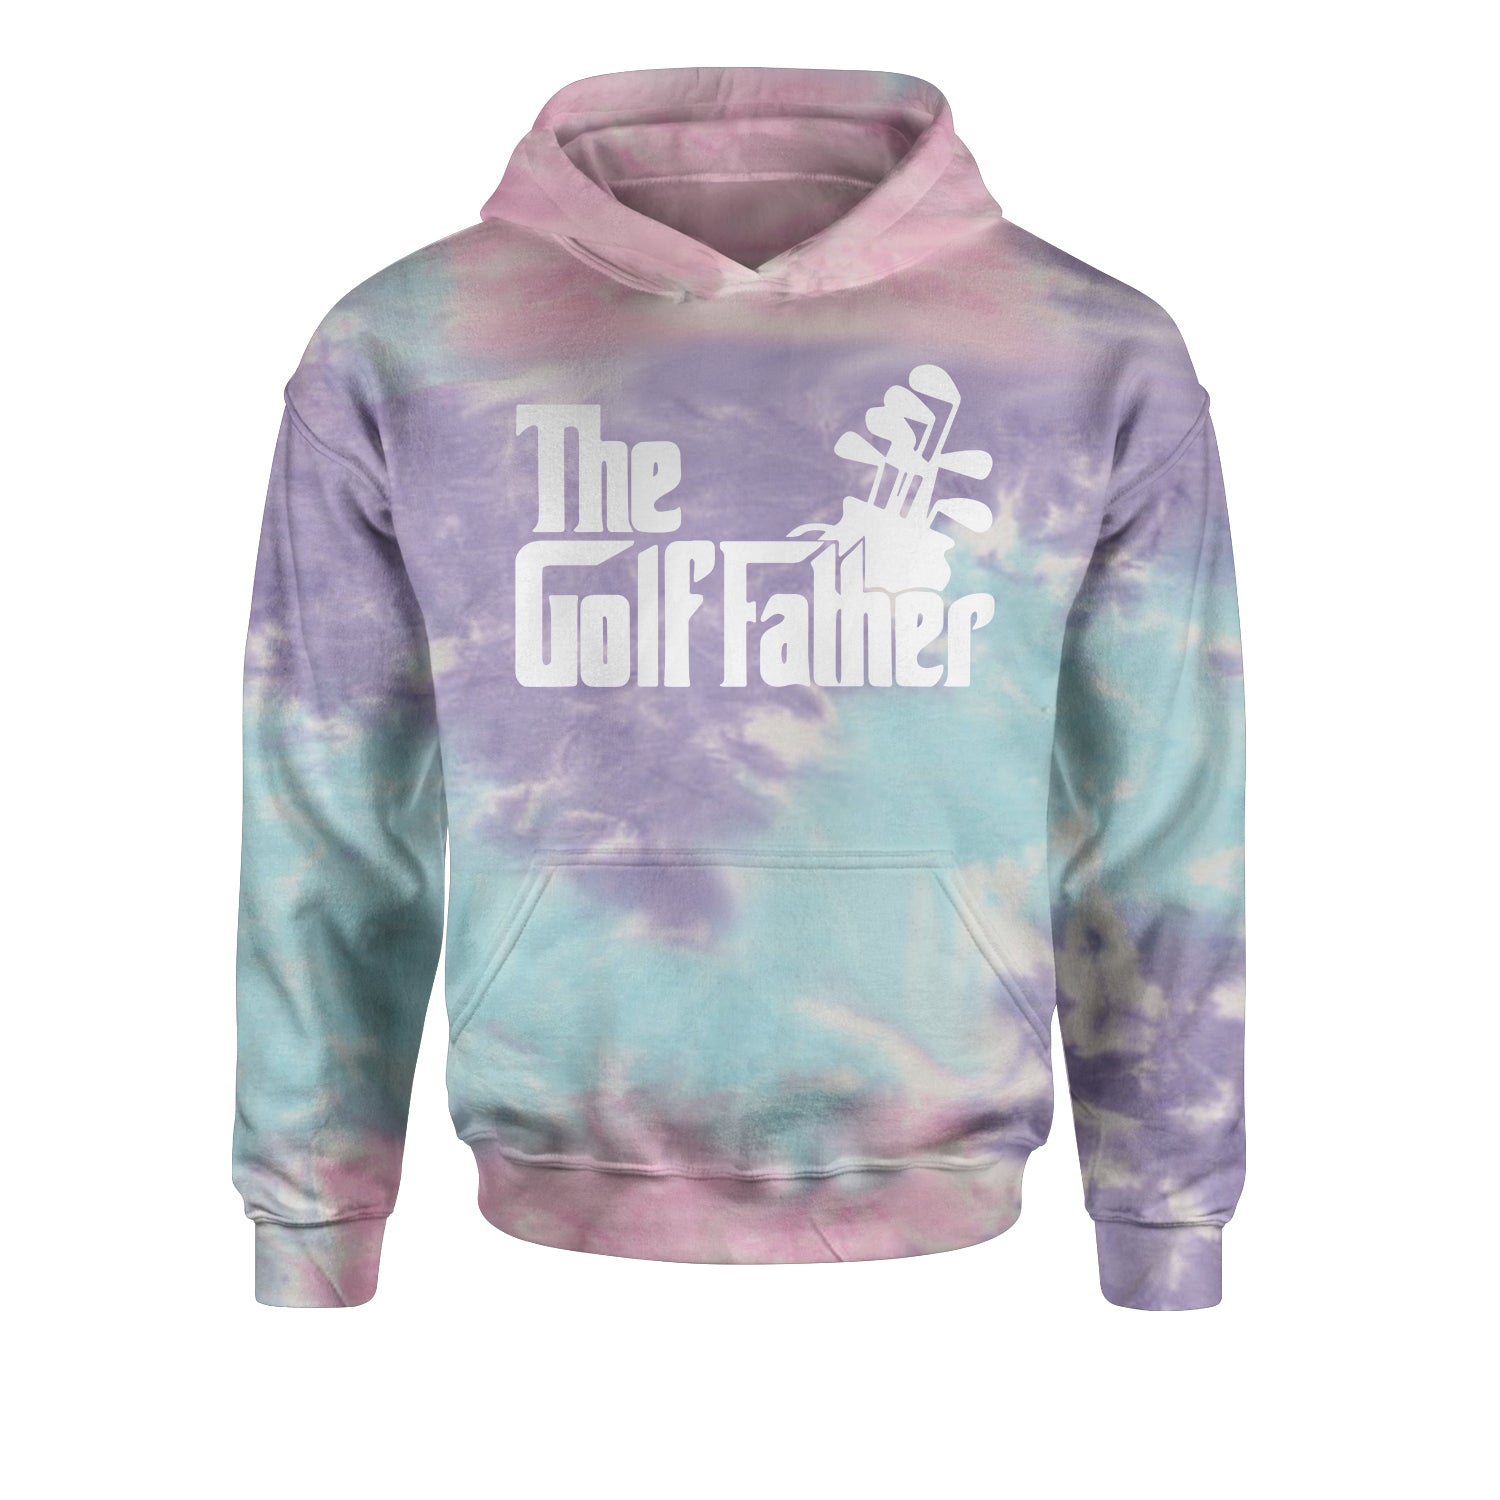 The Golf Father Golfing Dad Youth-Sized Hoodie #expressiontees by Expression Tees